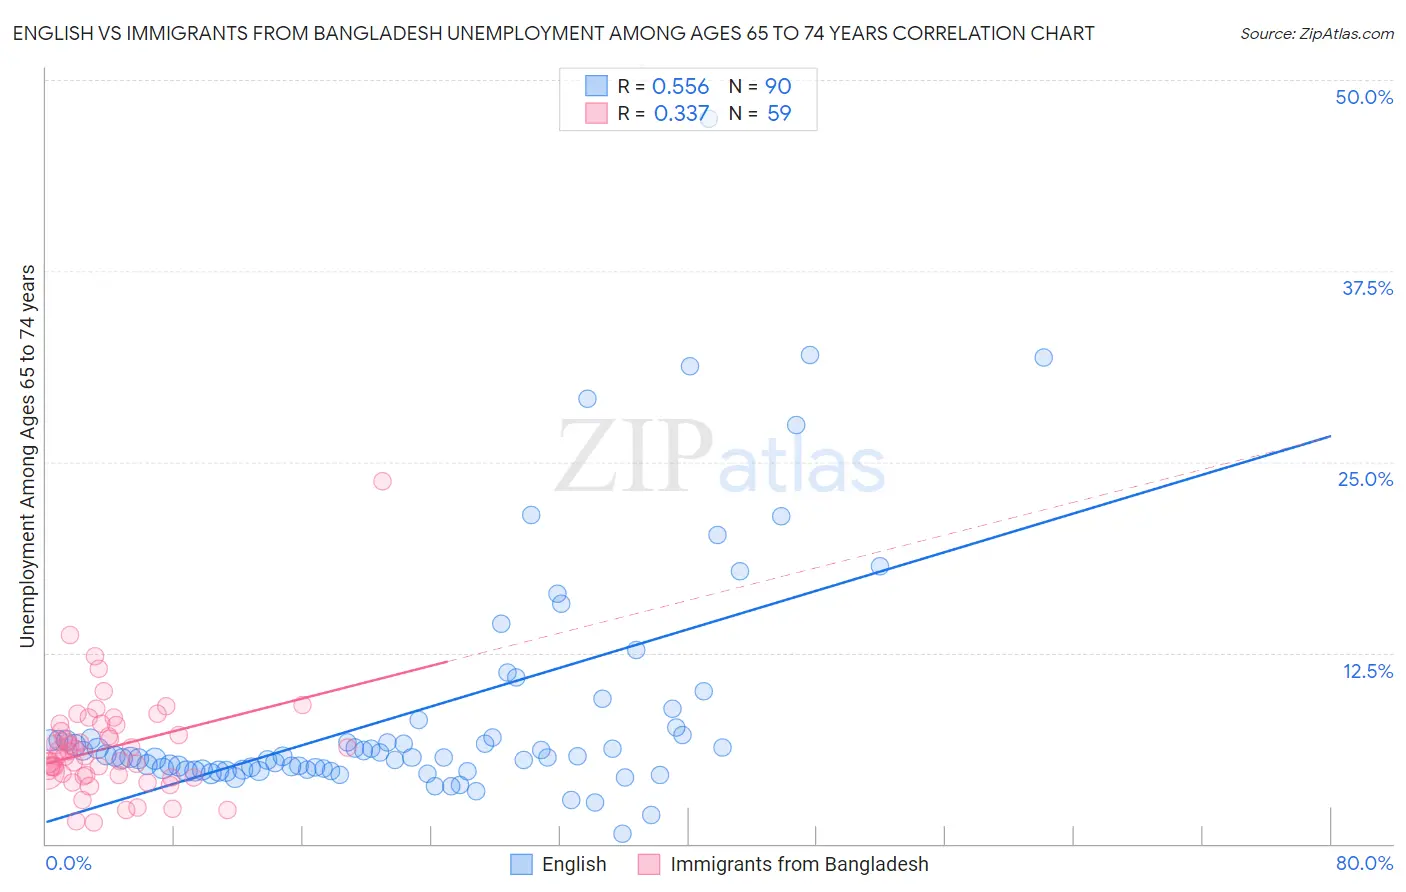 English vs Immigrants from Bangladesh Unemployment Among Ages 65 to 74 years